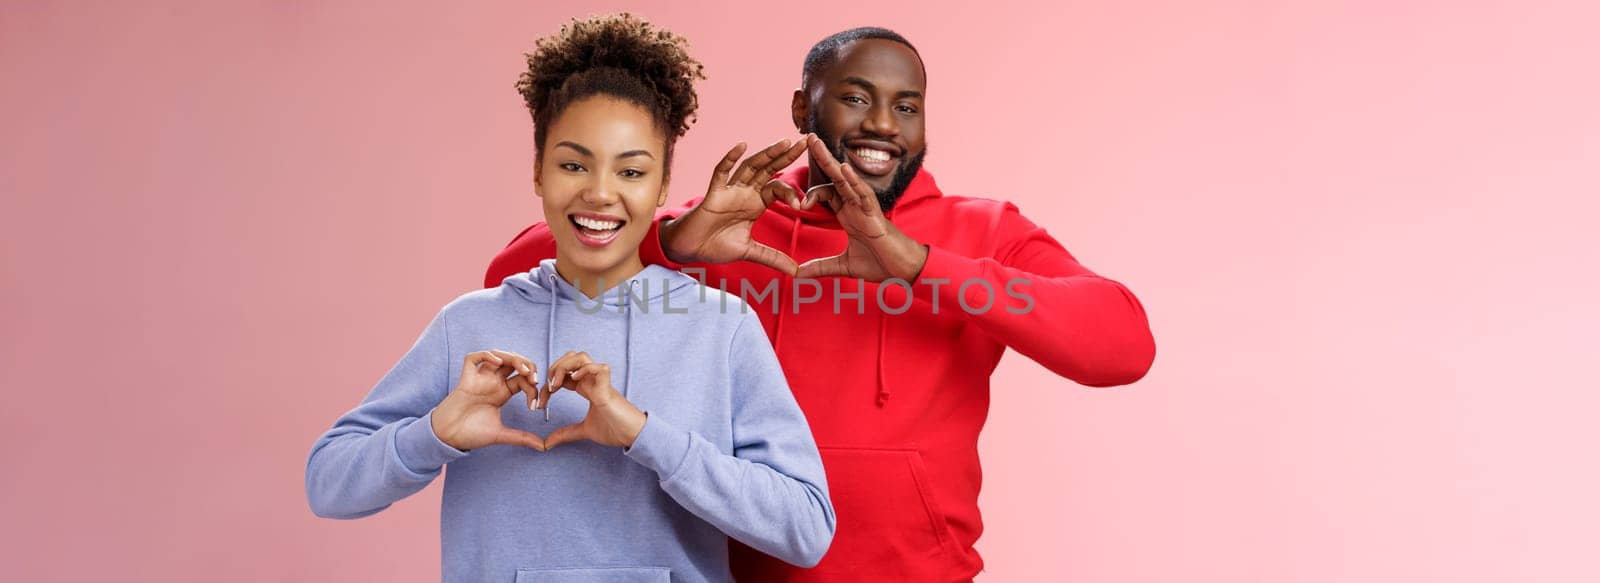 Charming joyful caring young african american family man woman siblings smiling broadly show heart gestures grinning express love empathy positivity, two loyal friends cherish friendship.